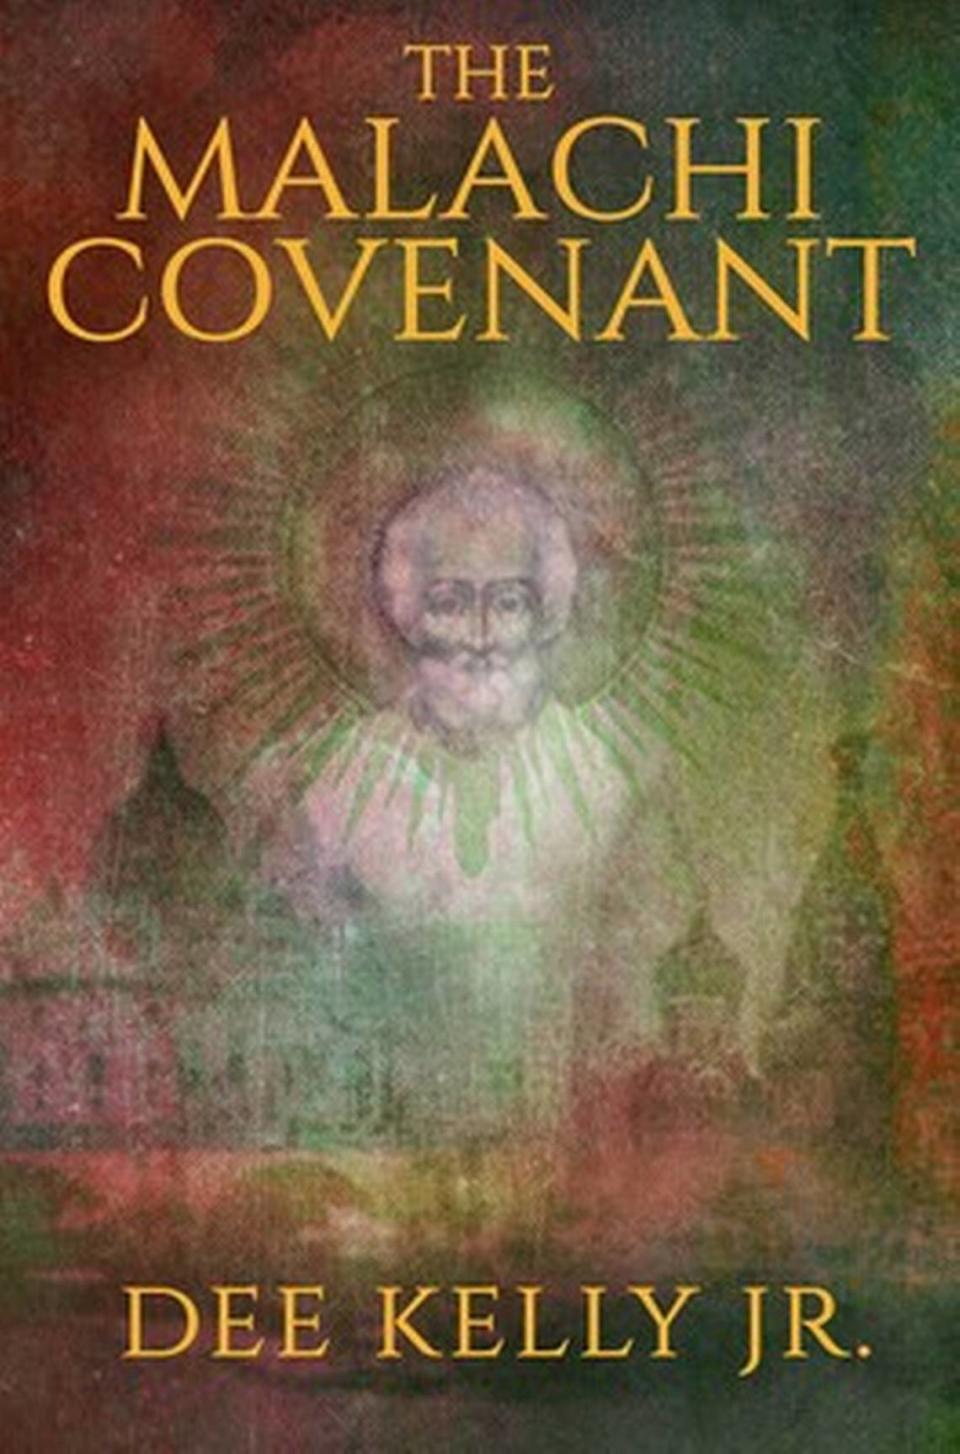 “The Malcachi Covenant” is the latest novel by Fort Worth attorney Dee Kelly.